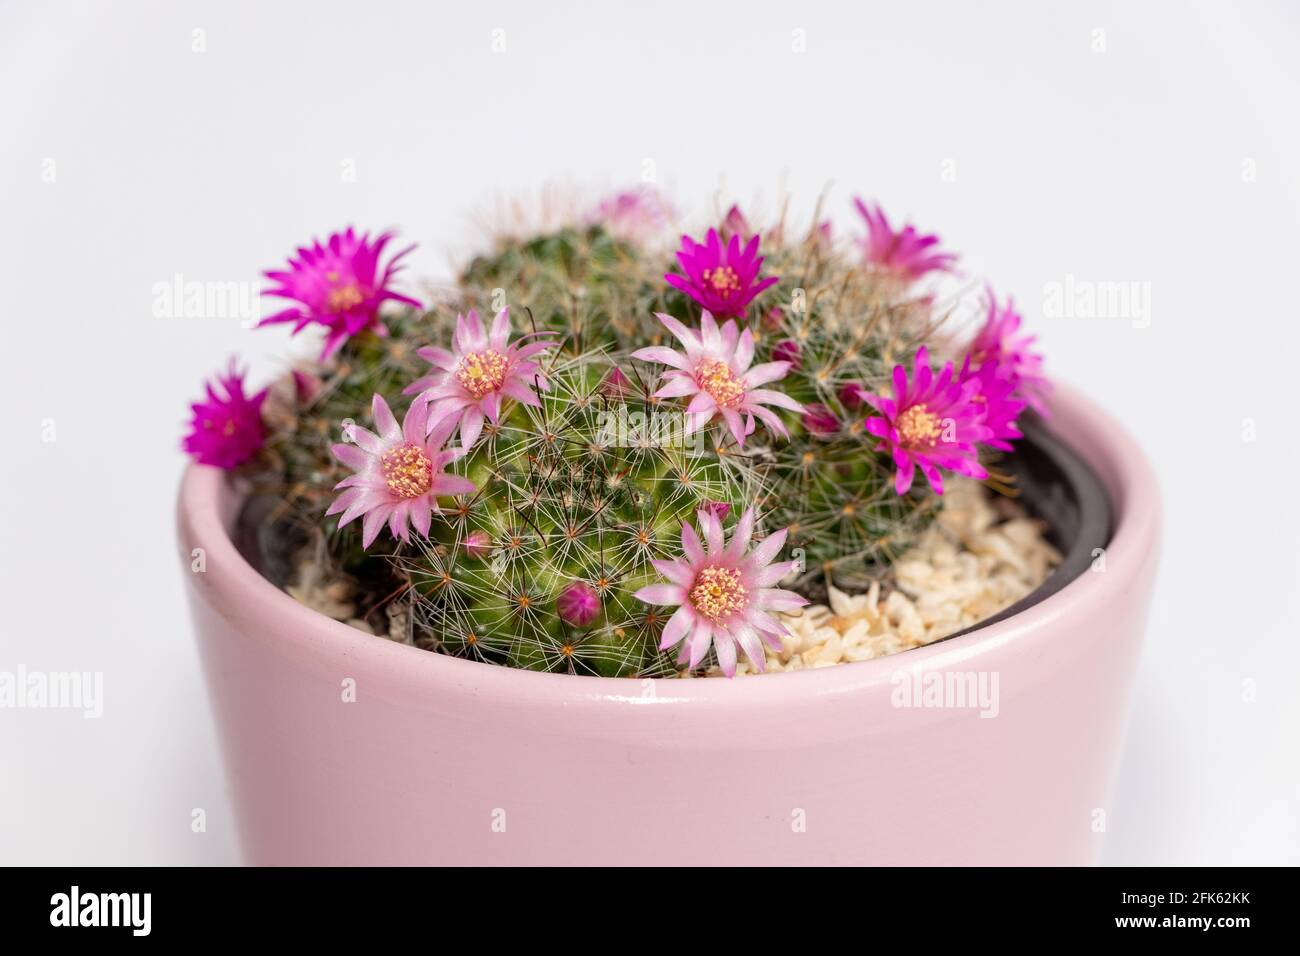 Blooming mamillaria cactus flower in clay pot on white blurred background. Selective focus. Close up. Stock Photo